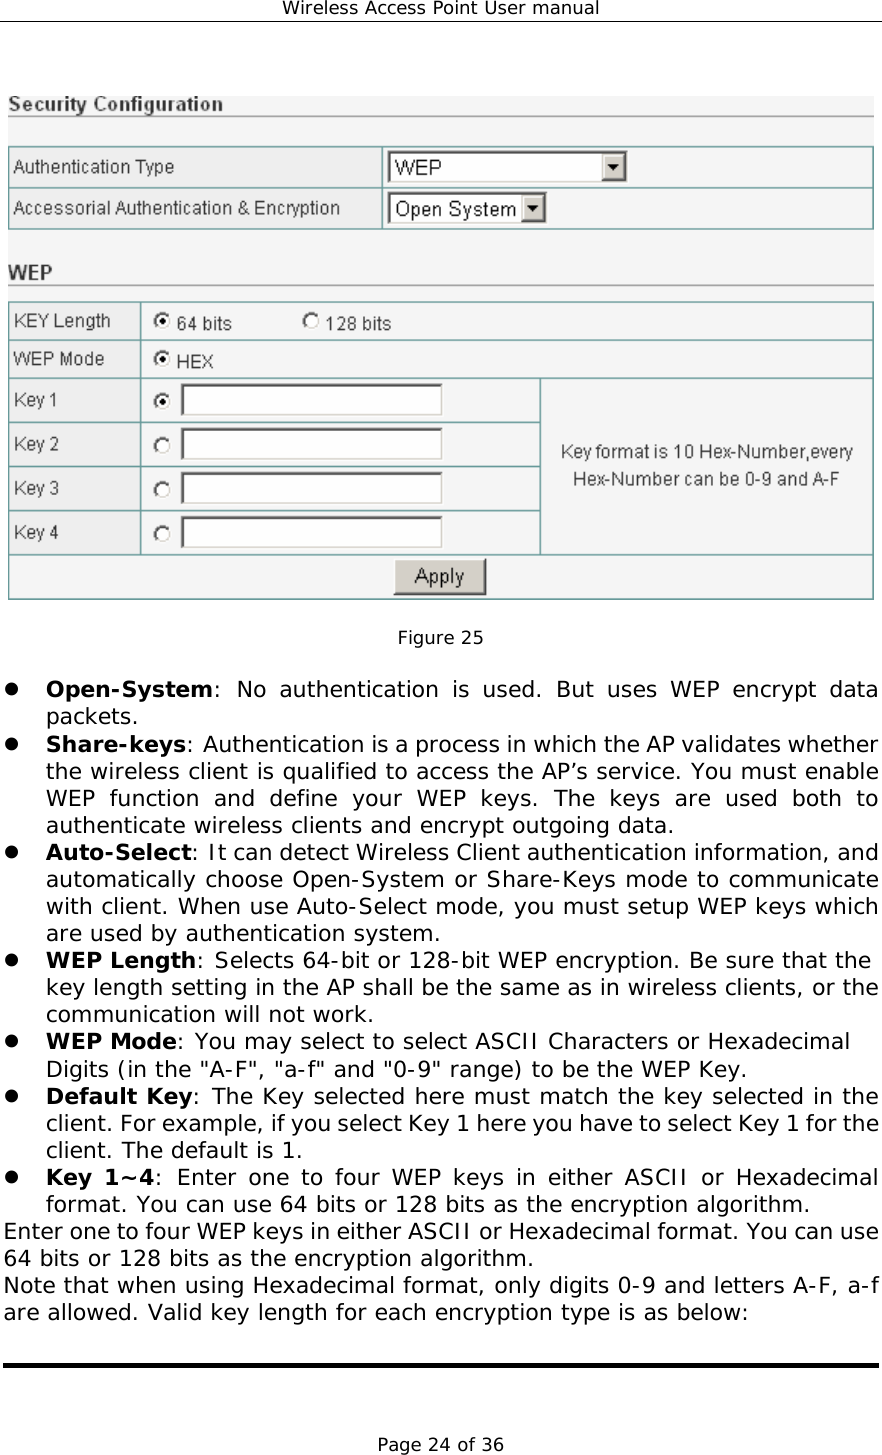 Wireless Access Point User manual Page 24 of 36    Figure 25  z Open-System: No authentication is used. But uses WEP encrypt data packets. z Share-keys: Authentication is a process in which the AP validates whether the wireless client is qualified to access the AP’s service. You must enable WEP function and define your WEP keys. The keys are used both to authenticate wireless clients and encrypt outgoing data. z Auto-Select: It can detect Wireless Client authentication information, and automatically choose Open-System or Share-Keys mode to communicate with client. When use Auto-Select mode, you must setup WEP keys which are used by authentication system. z WEP Length: Selects 64-bit or 128-bit WEP encryption. Be sure that the key length setting in the AP shall be the same as in wireless clients, or the communication will not work. z WEP Mode: You may select to select ASCII Characters or Hexadecimal Digits (in the &quot;A-F&quot;, &quot;a-f&quot; and &quot;0-9&quot; range) to be the WEP Key. z Default Key: The Key selected here must match the key selected in the client. For example, if you select Key 1 here you have to select Key 1 for the client. The default is 1.  z Key 1~4: Enter one to four WEP keys in either ASCII or Hexadecimal format. You can use 64 bits or 128 bits as the encryption algorithm.  Enter one to four WEP keys in either ASCII or Hexadecimal format. You can use 64 bits or 128 bits as the encryption algorithm. Note that when using Hexadecimal format, only digits 0-9 and letters A-F, a-f are allowed. Valid key length for each encryption type is as below:   